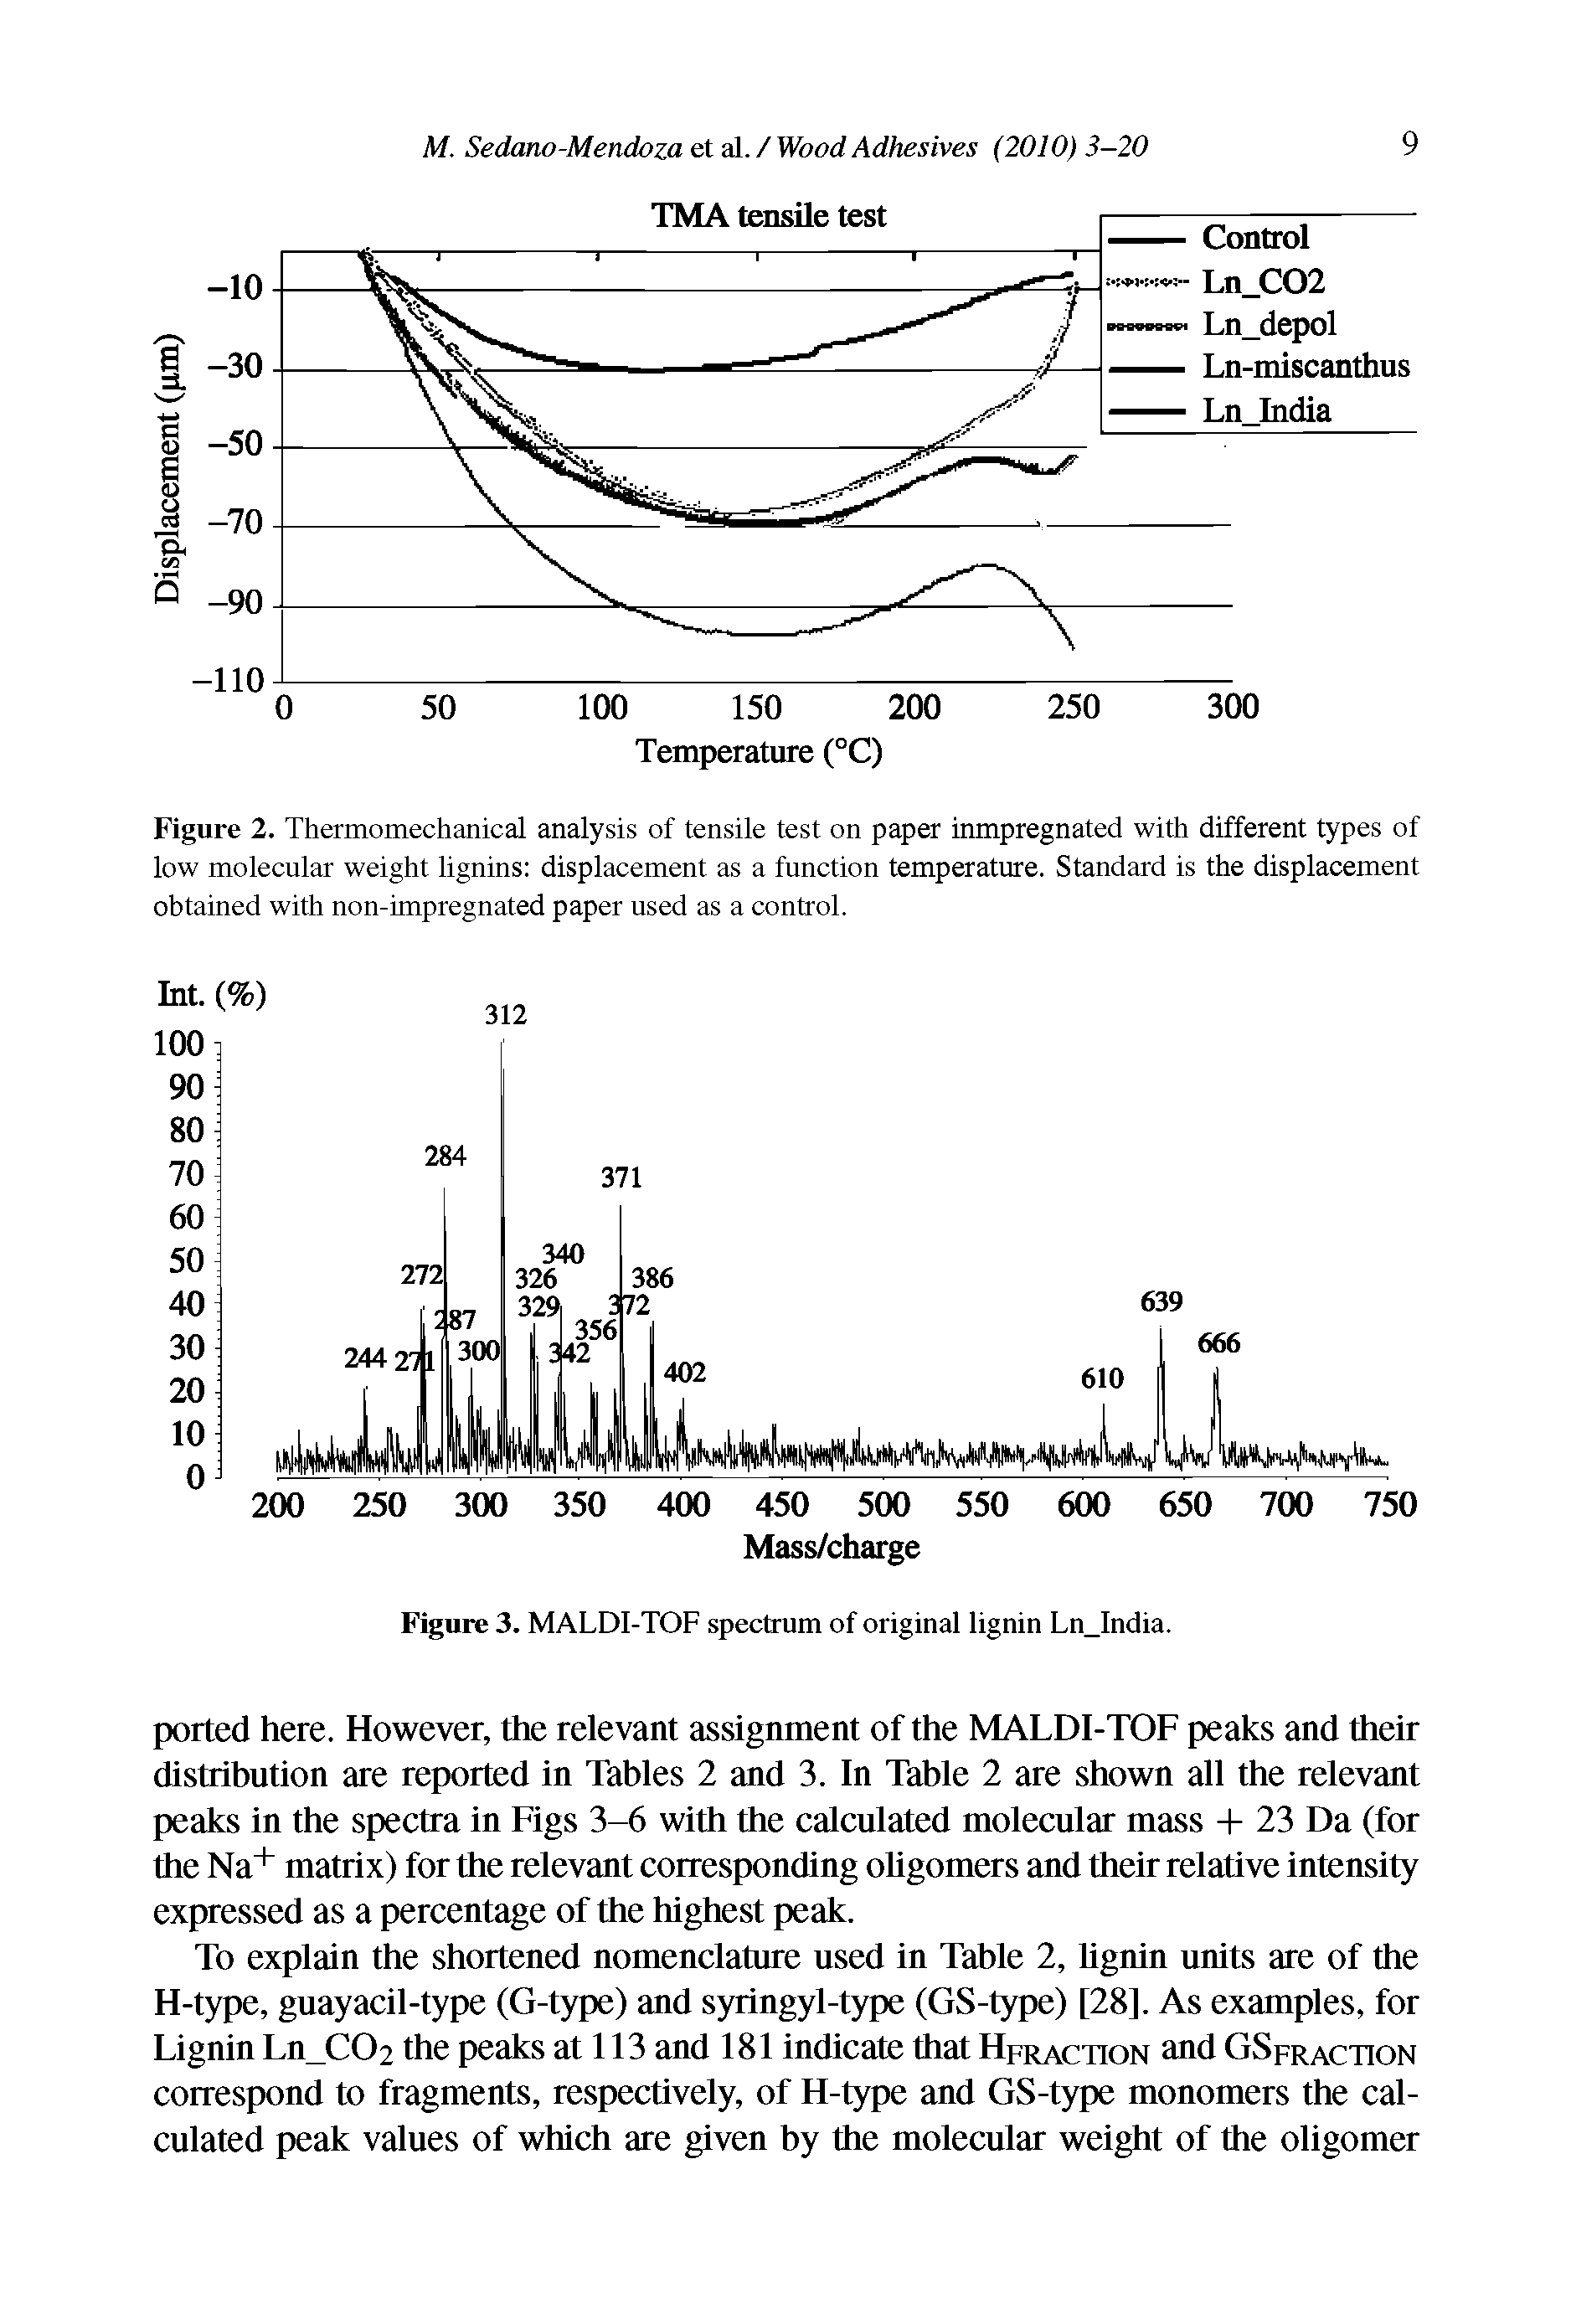 Figure 2. Thermomechanical analysis of tensile test on paper inmpregnated with different types of low molecular weight lignins displacement as a function temperature. Standard is the displacement obtained with non-impregnated paper used as a control.